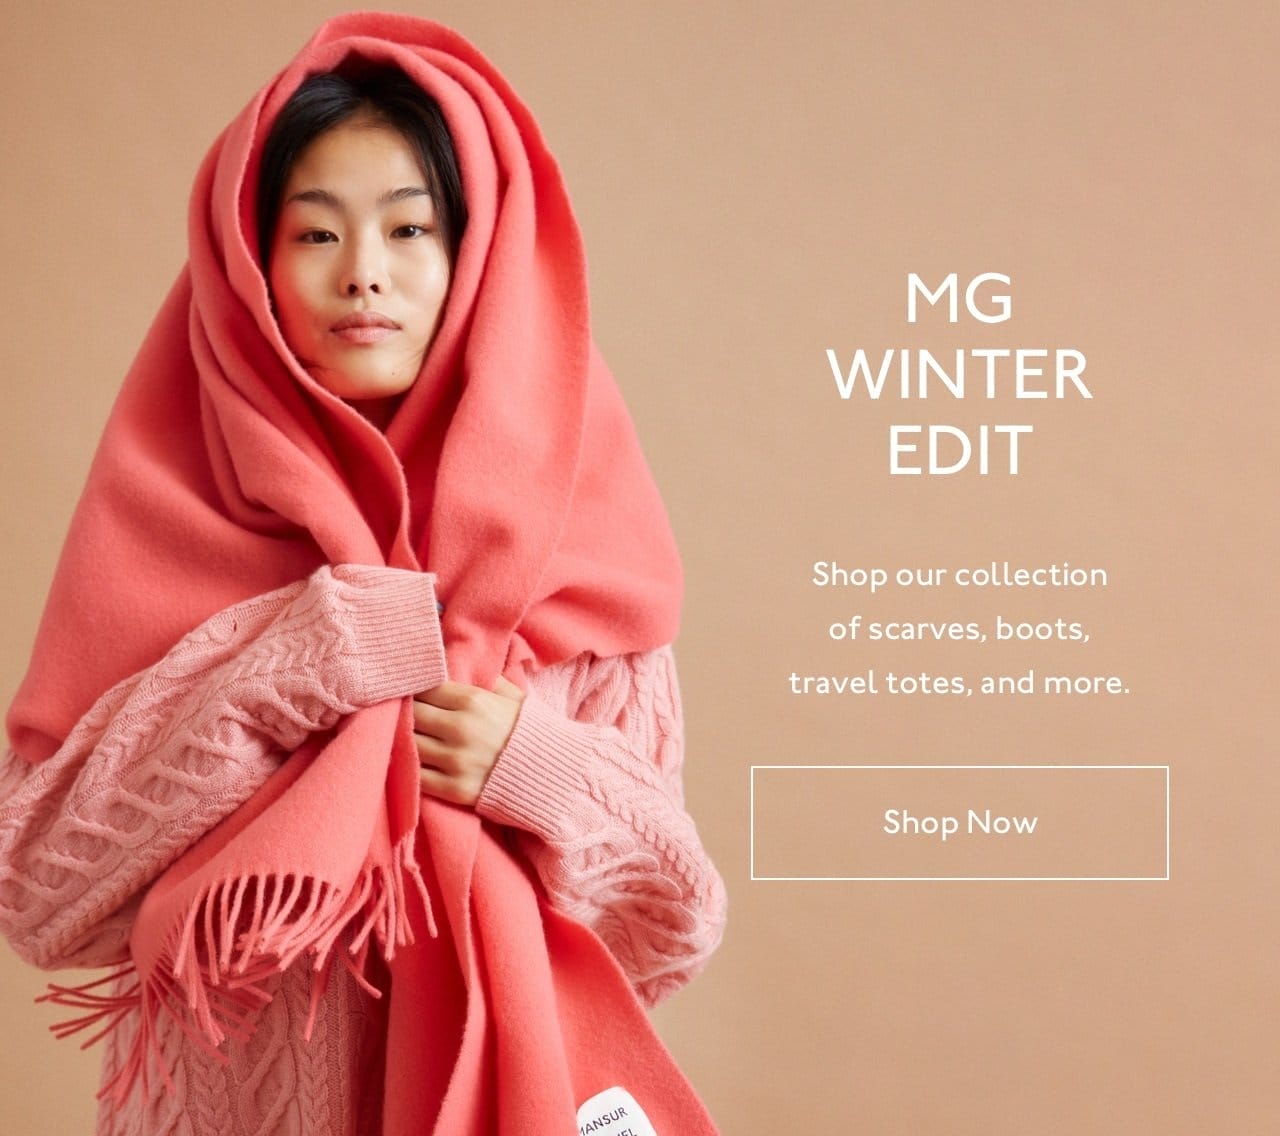 The MG Winter Edit. Shop our collection of scarves, boots, travel totes, and more.